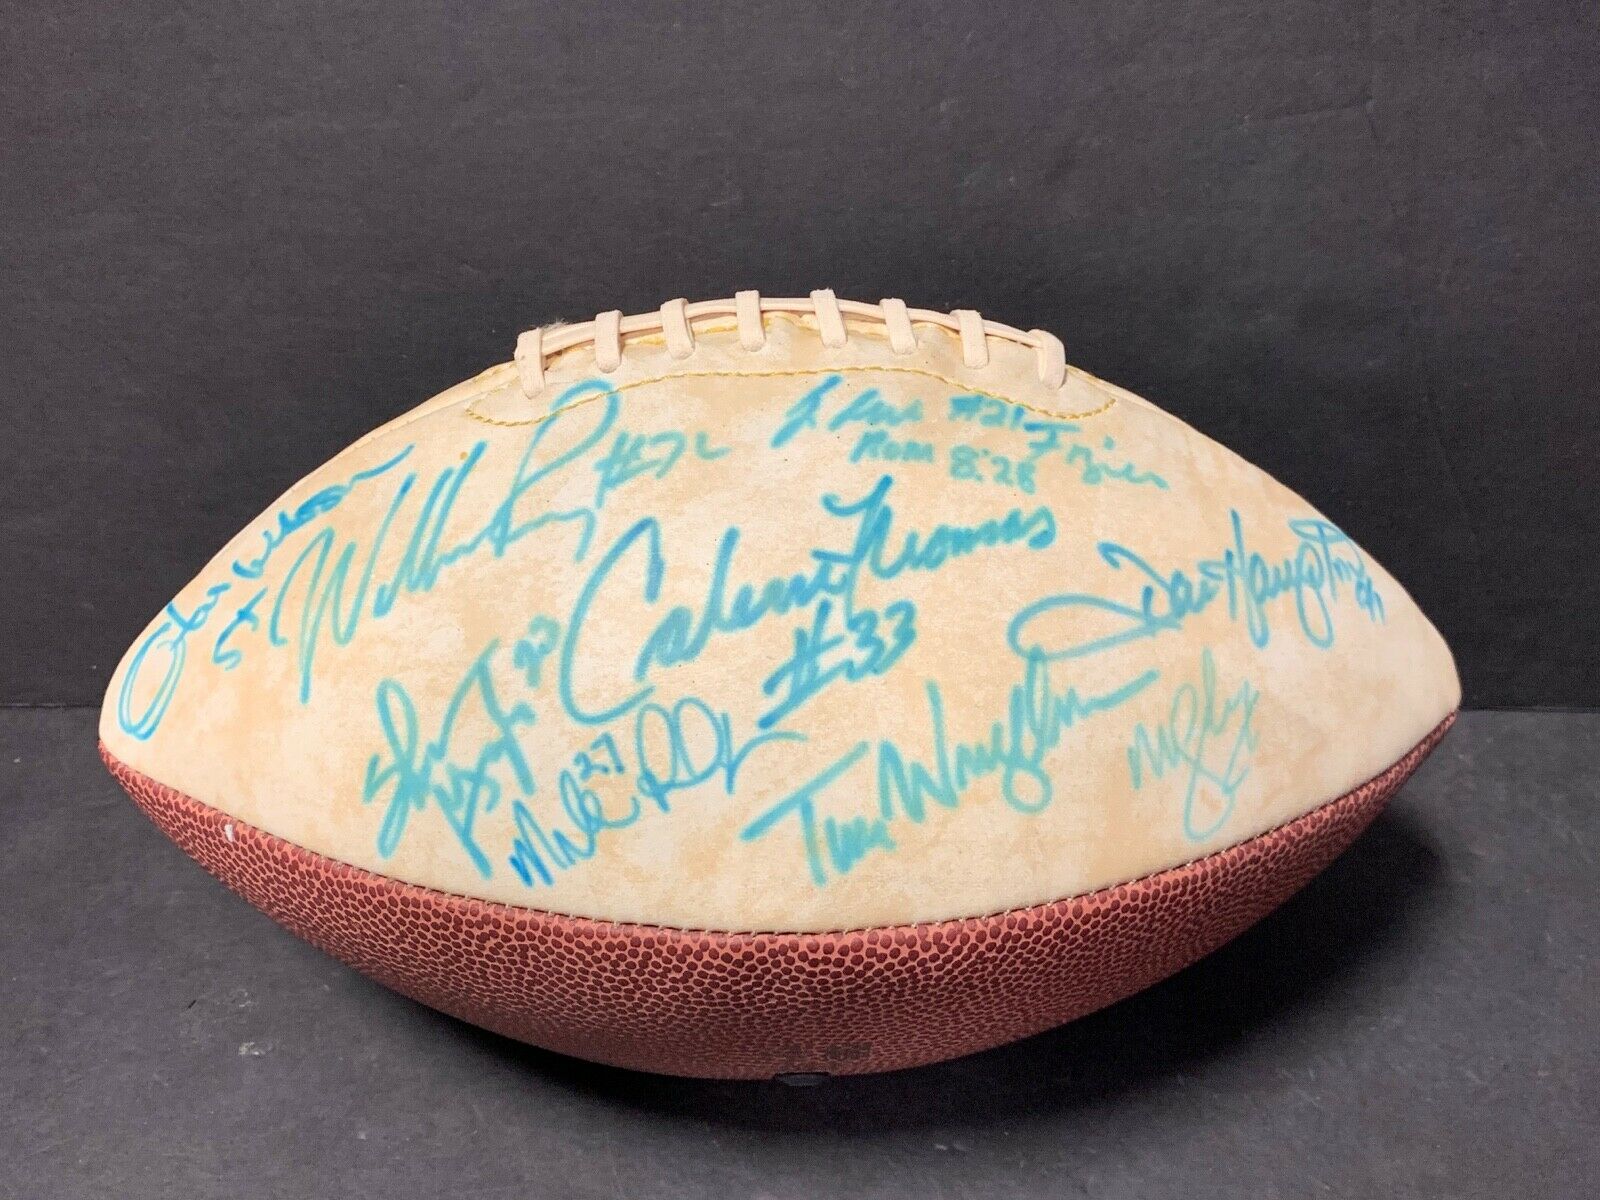 Perry Hampton Super Bowl XX Chicago Bears Multi Signed Football Imperfect 9 Auto